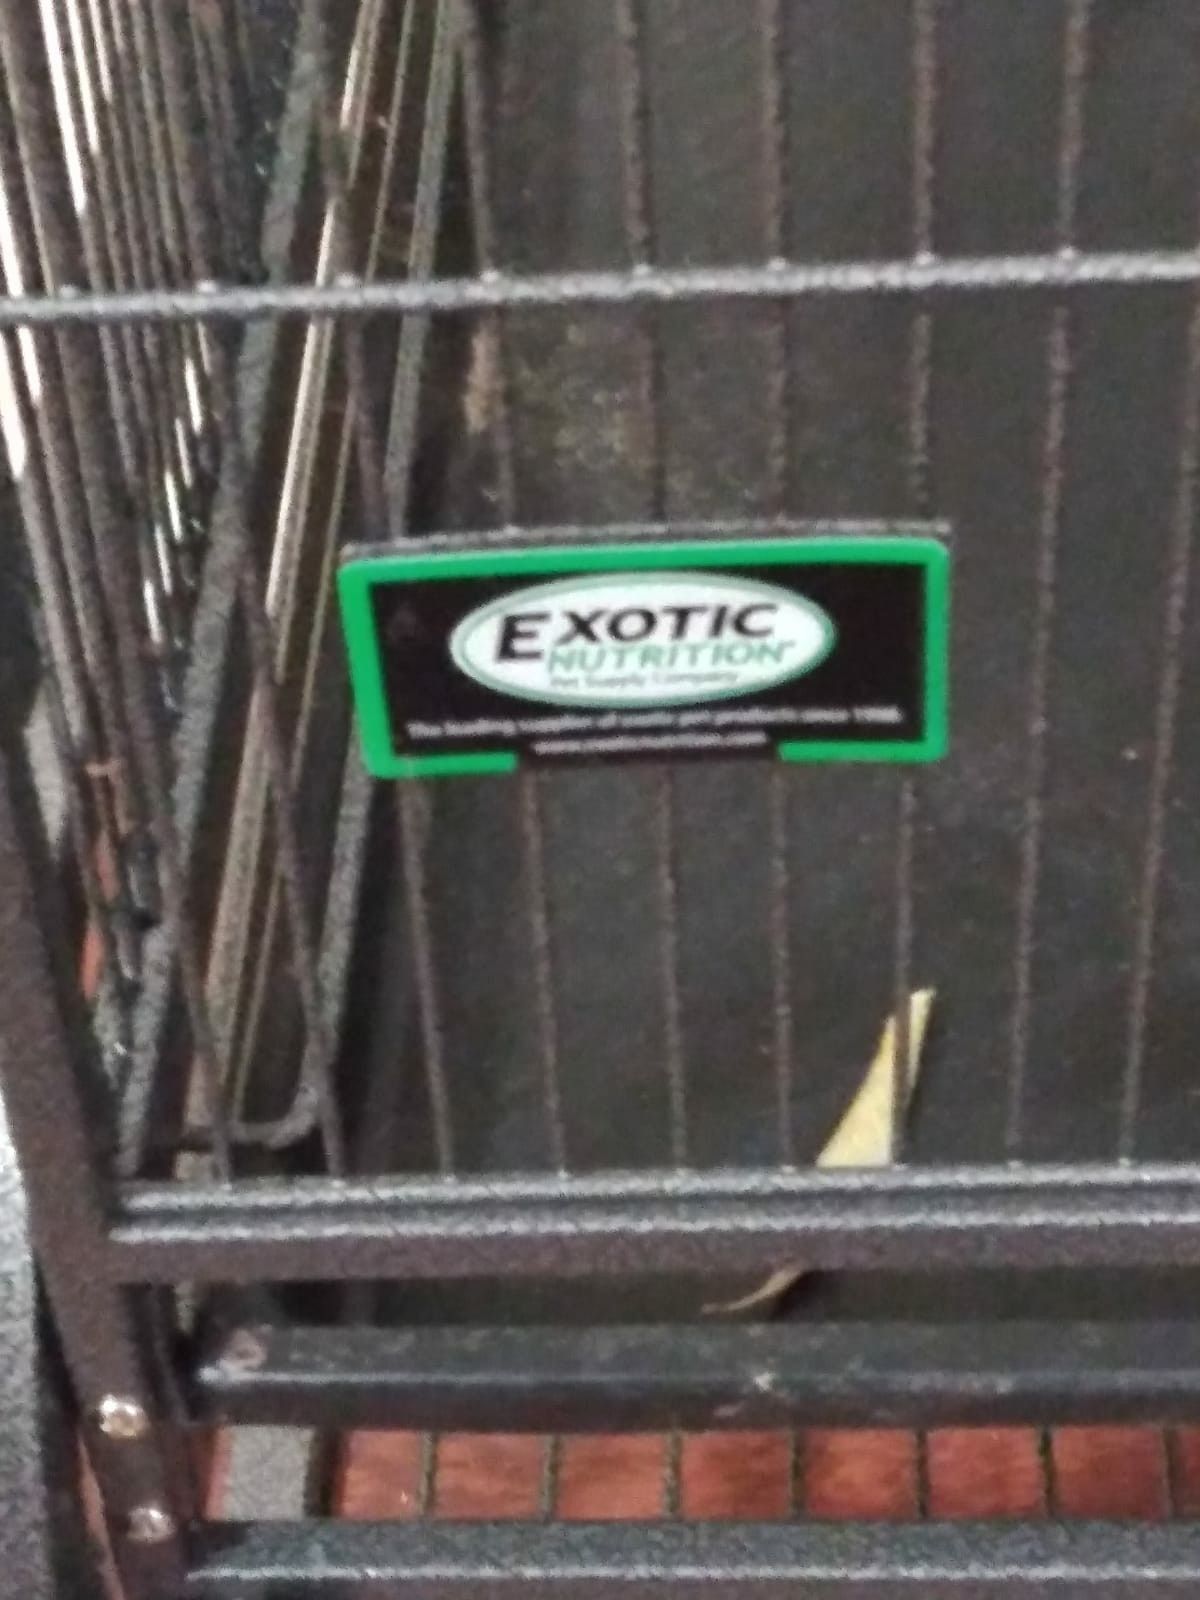 Bird Cage brand exotic nutrition